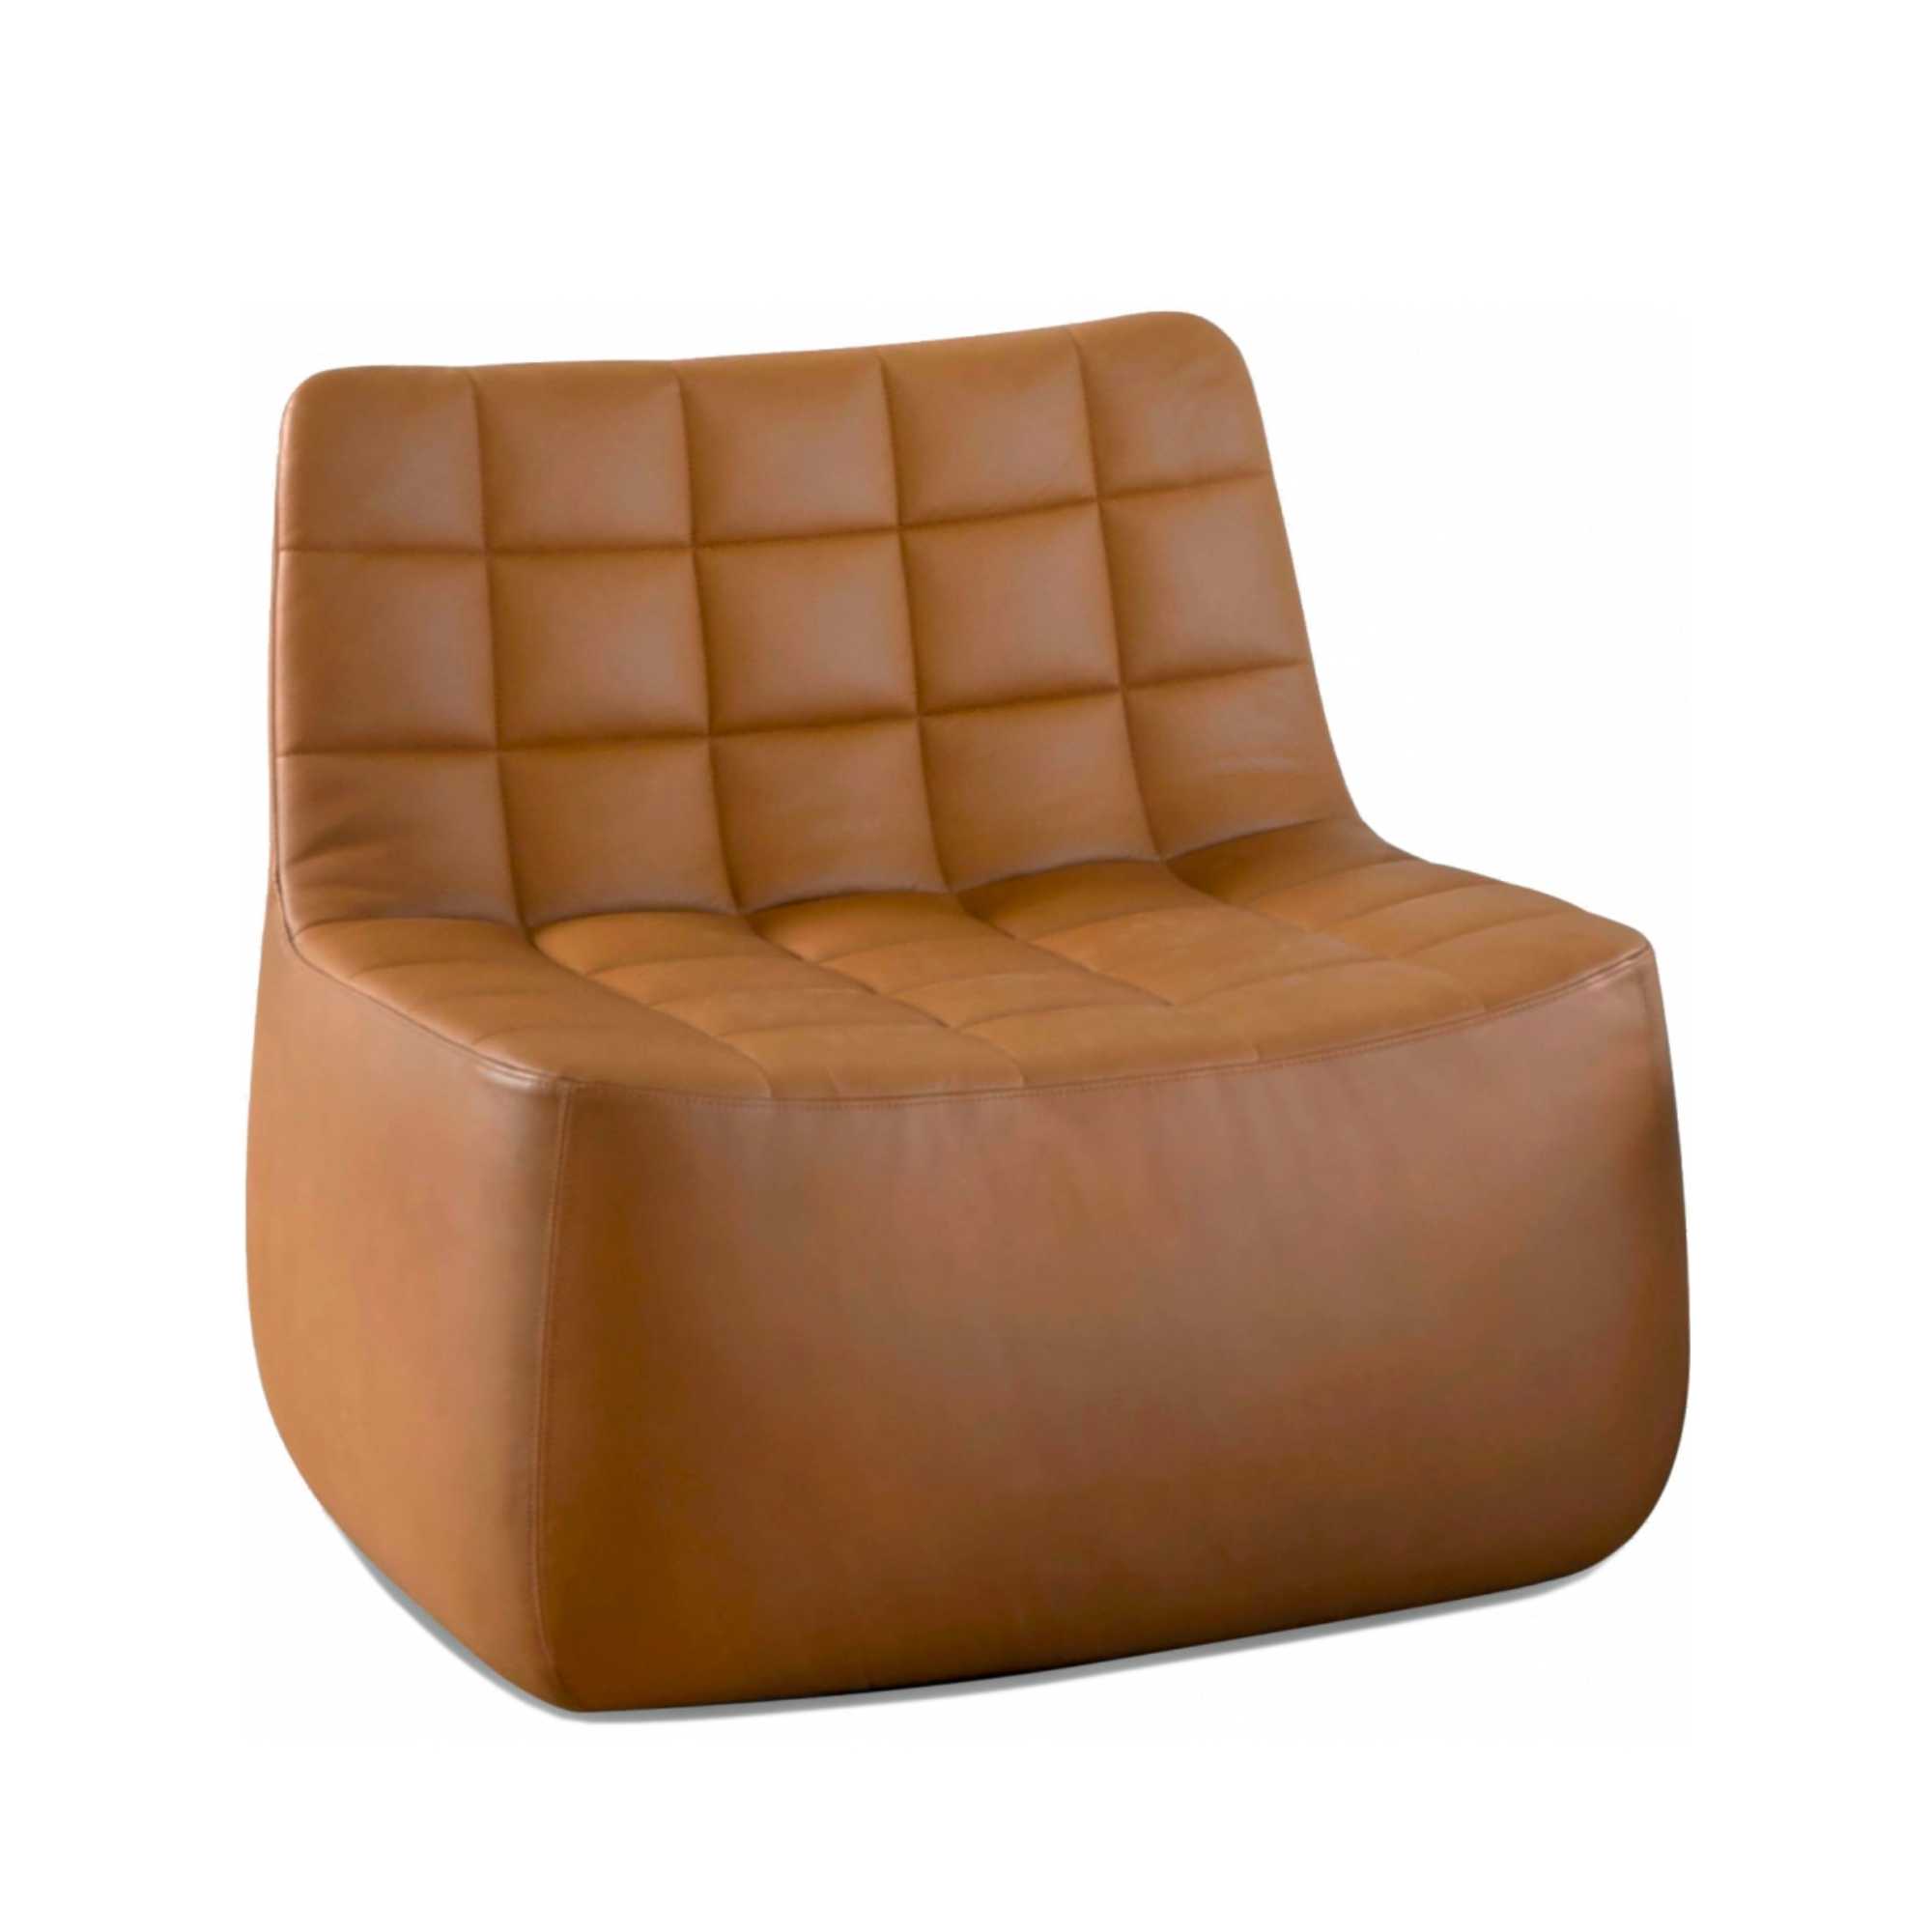 Norhtern Yam lounge chair, brown leather